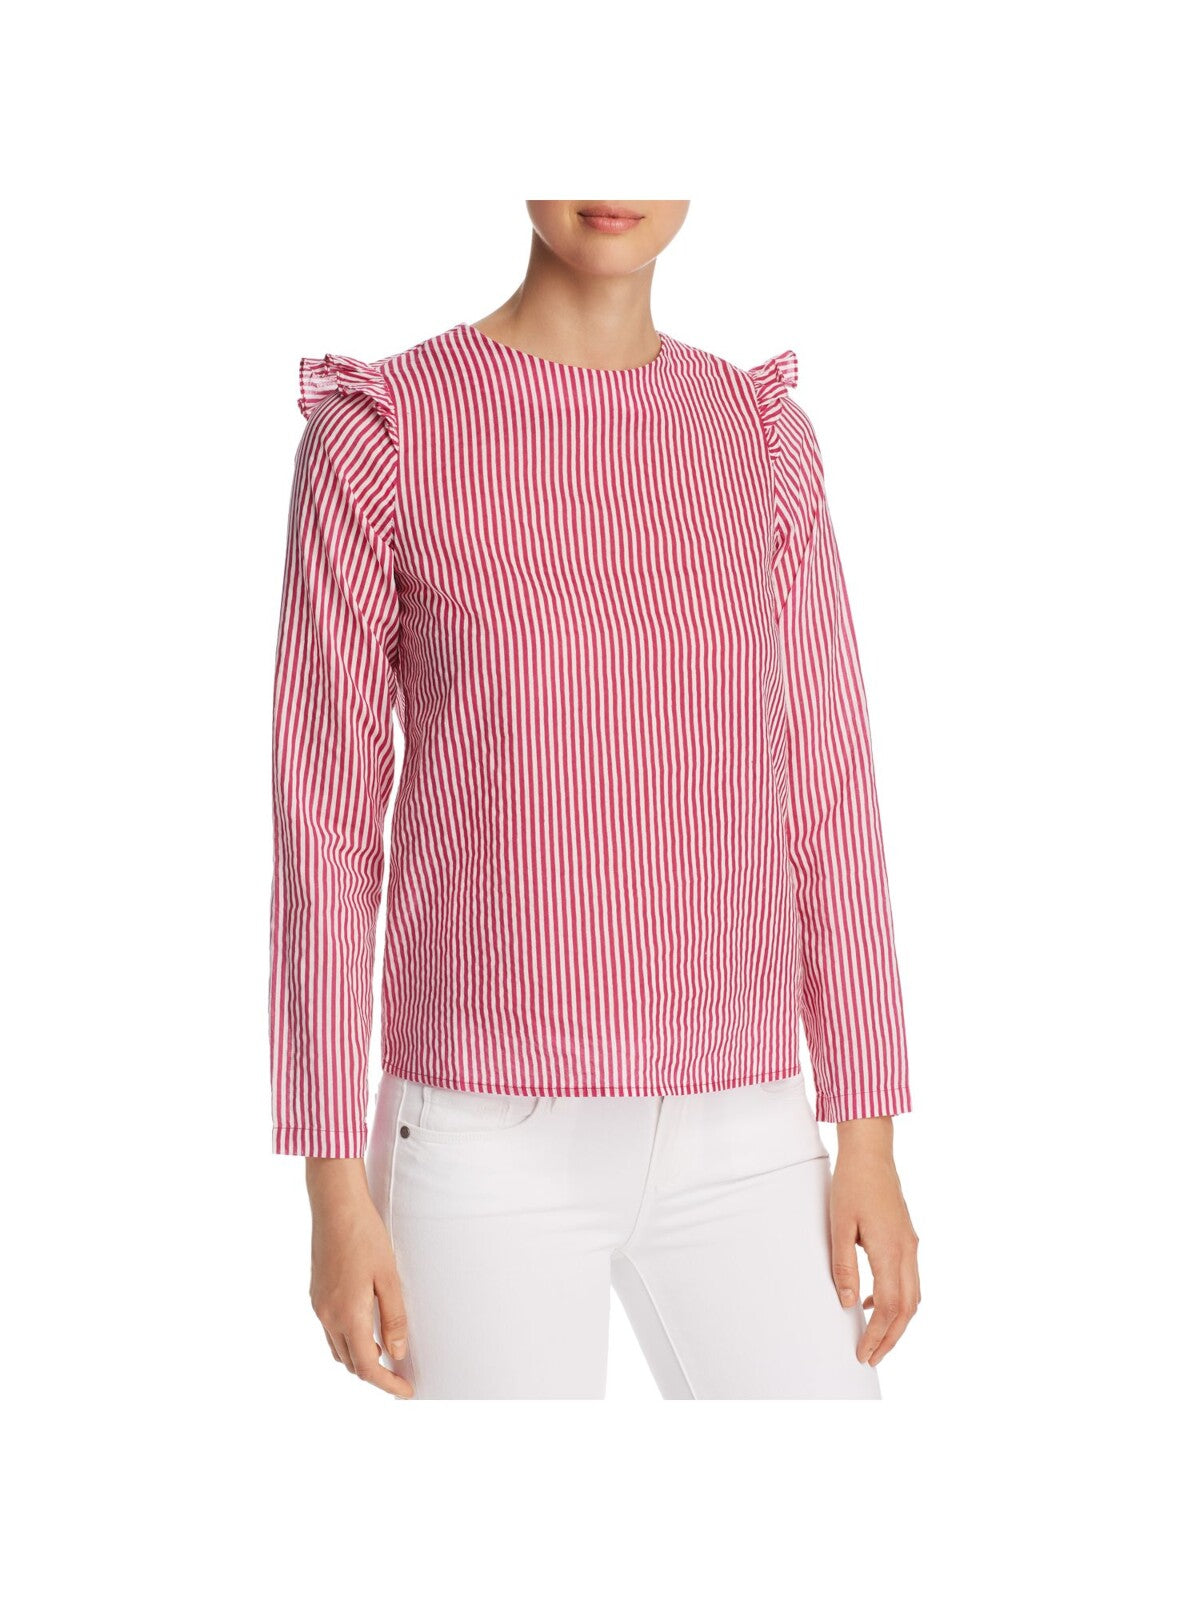 VERO MODA Womens Pink Ruffled Tie Back Cut Out Striped Long Sleeve Crew Neck Wear To Work Top M